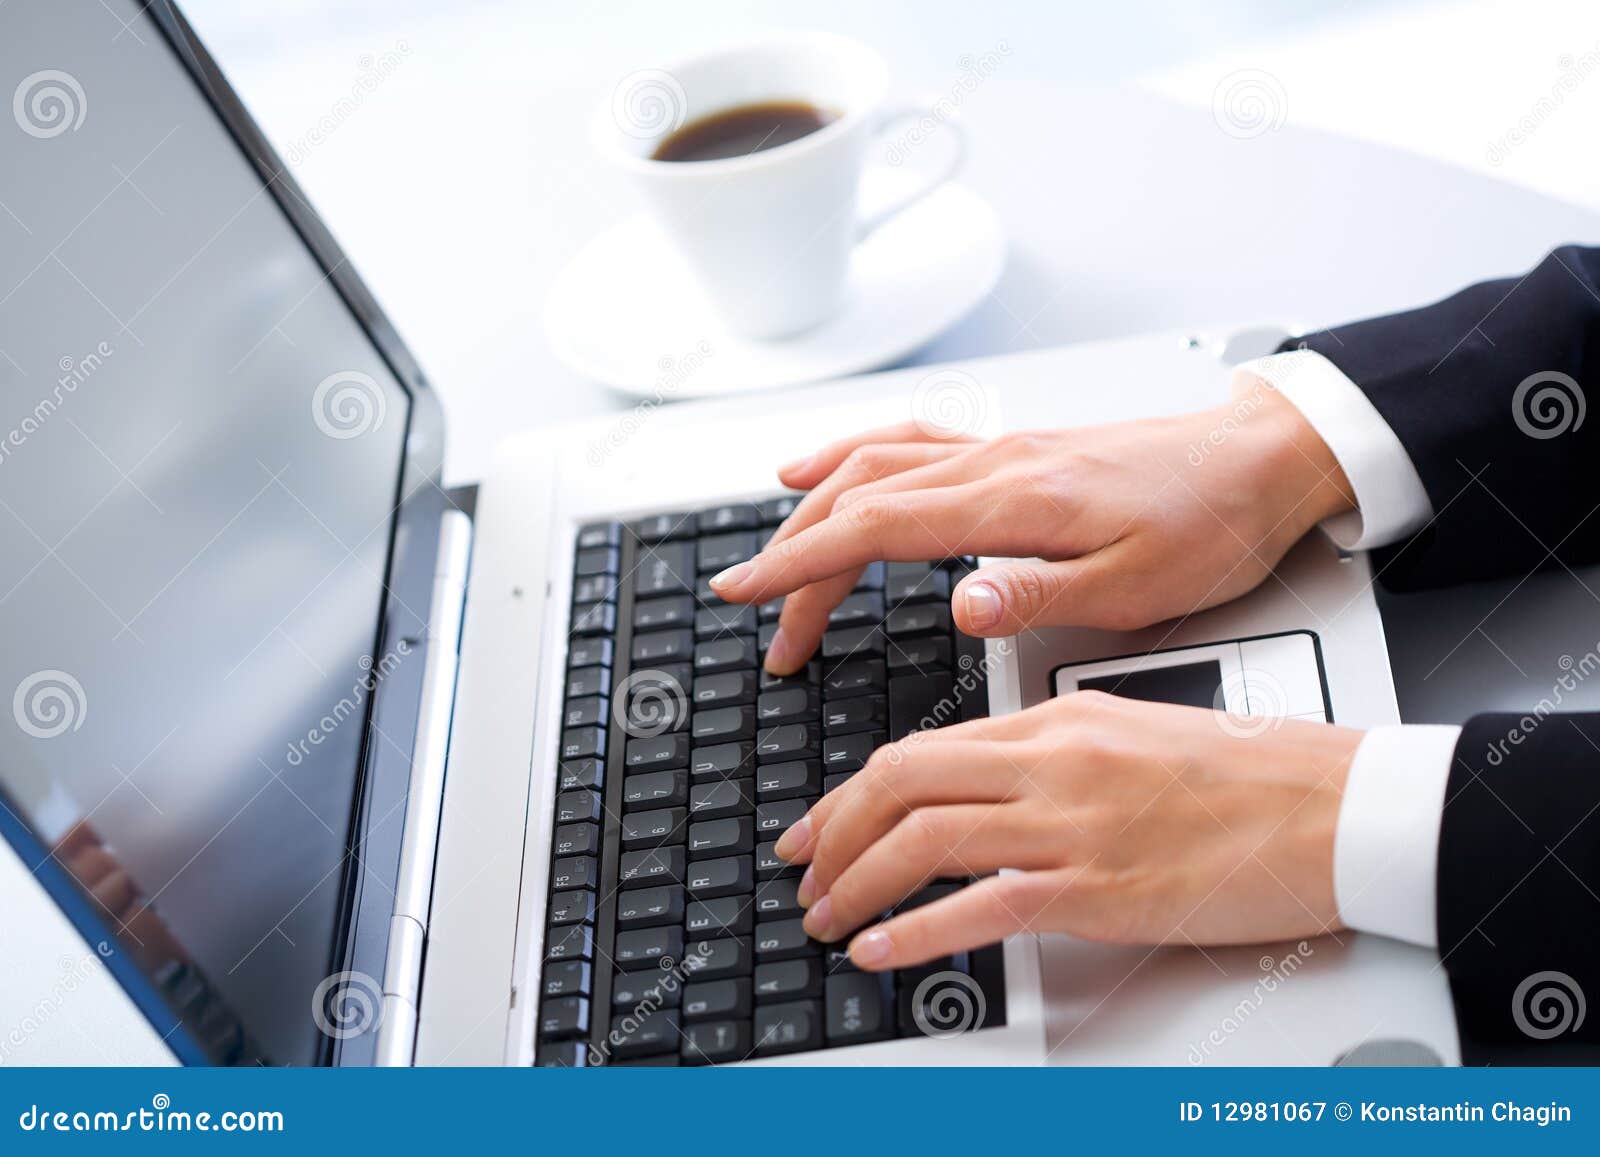 Computer Work Royalty Free Stock Photography - Image: 12981067